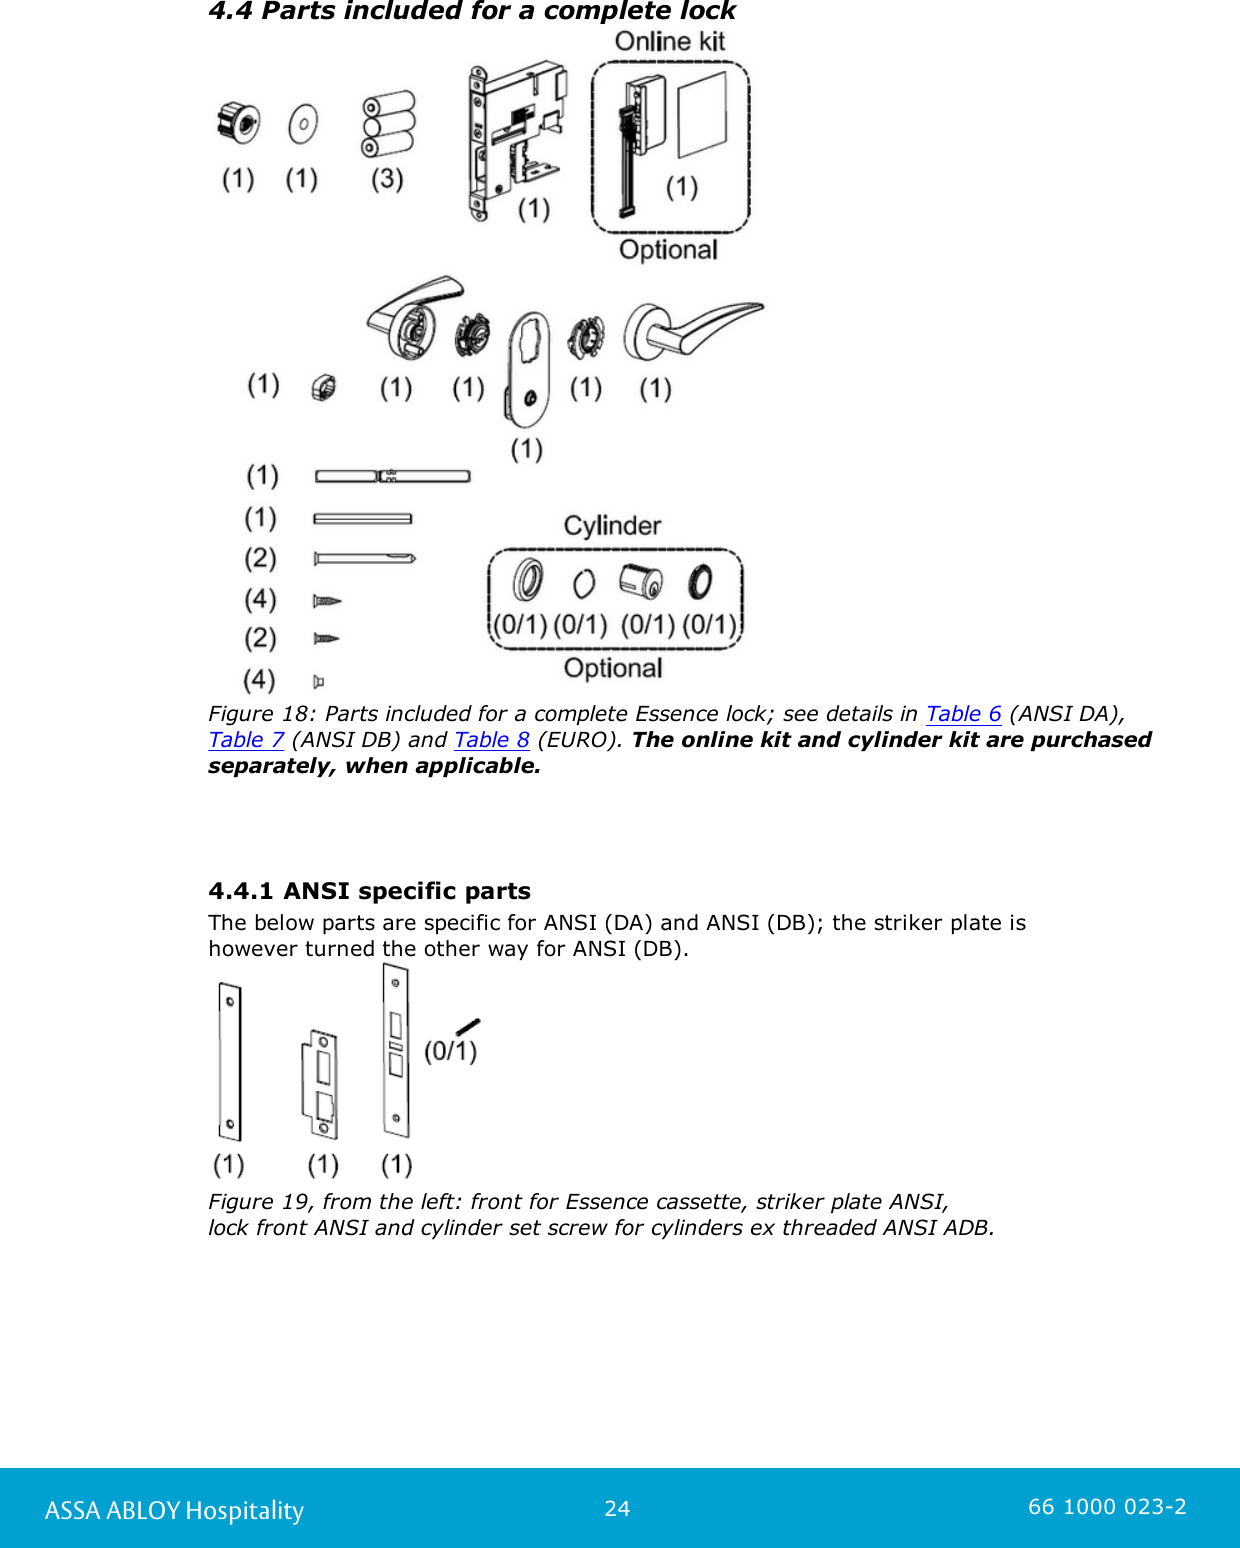 24ASSA ABLOY Hospitality 66 1000 023-24.4 Parts included for a complete lockFigure 18: Parts included for a complete Essence lock; see details in Table 6 (ANSI DA), Table 7 (ANSI DB) and Table 8 (EURO). The online kit and cylinder kit are purchasedseparately, when applicable. 4.4.1 ANSI specific partsThe below parts are specific for ANSI (DA) and ANSI (DB); the striker plate ishowever turned the other way for ANSI (DB).    Figure 19, from the left: front for Essence cassette, striker plate ANSI, lock front ANSI and cylinder set screw for cylinders ex threaded ANSI ADB.